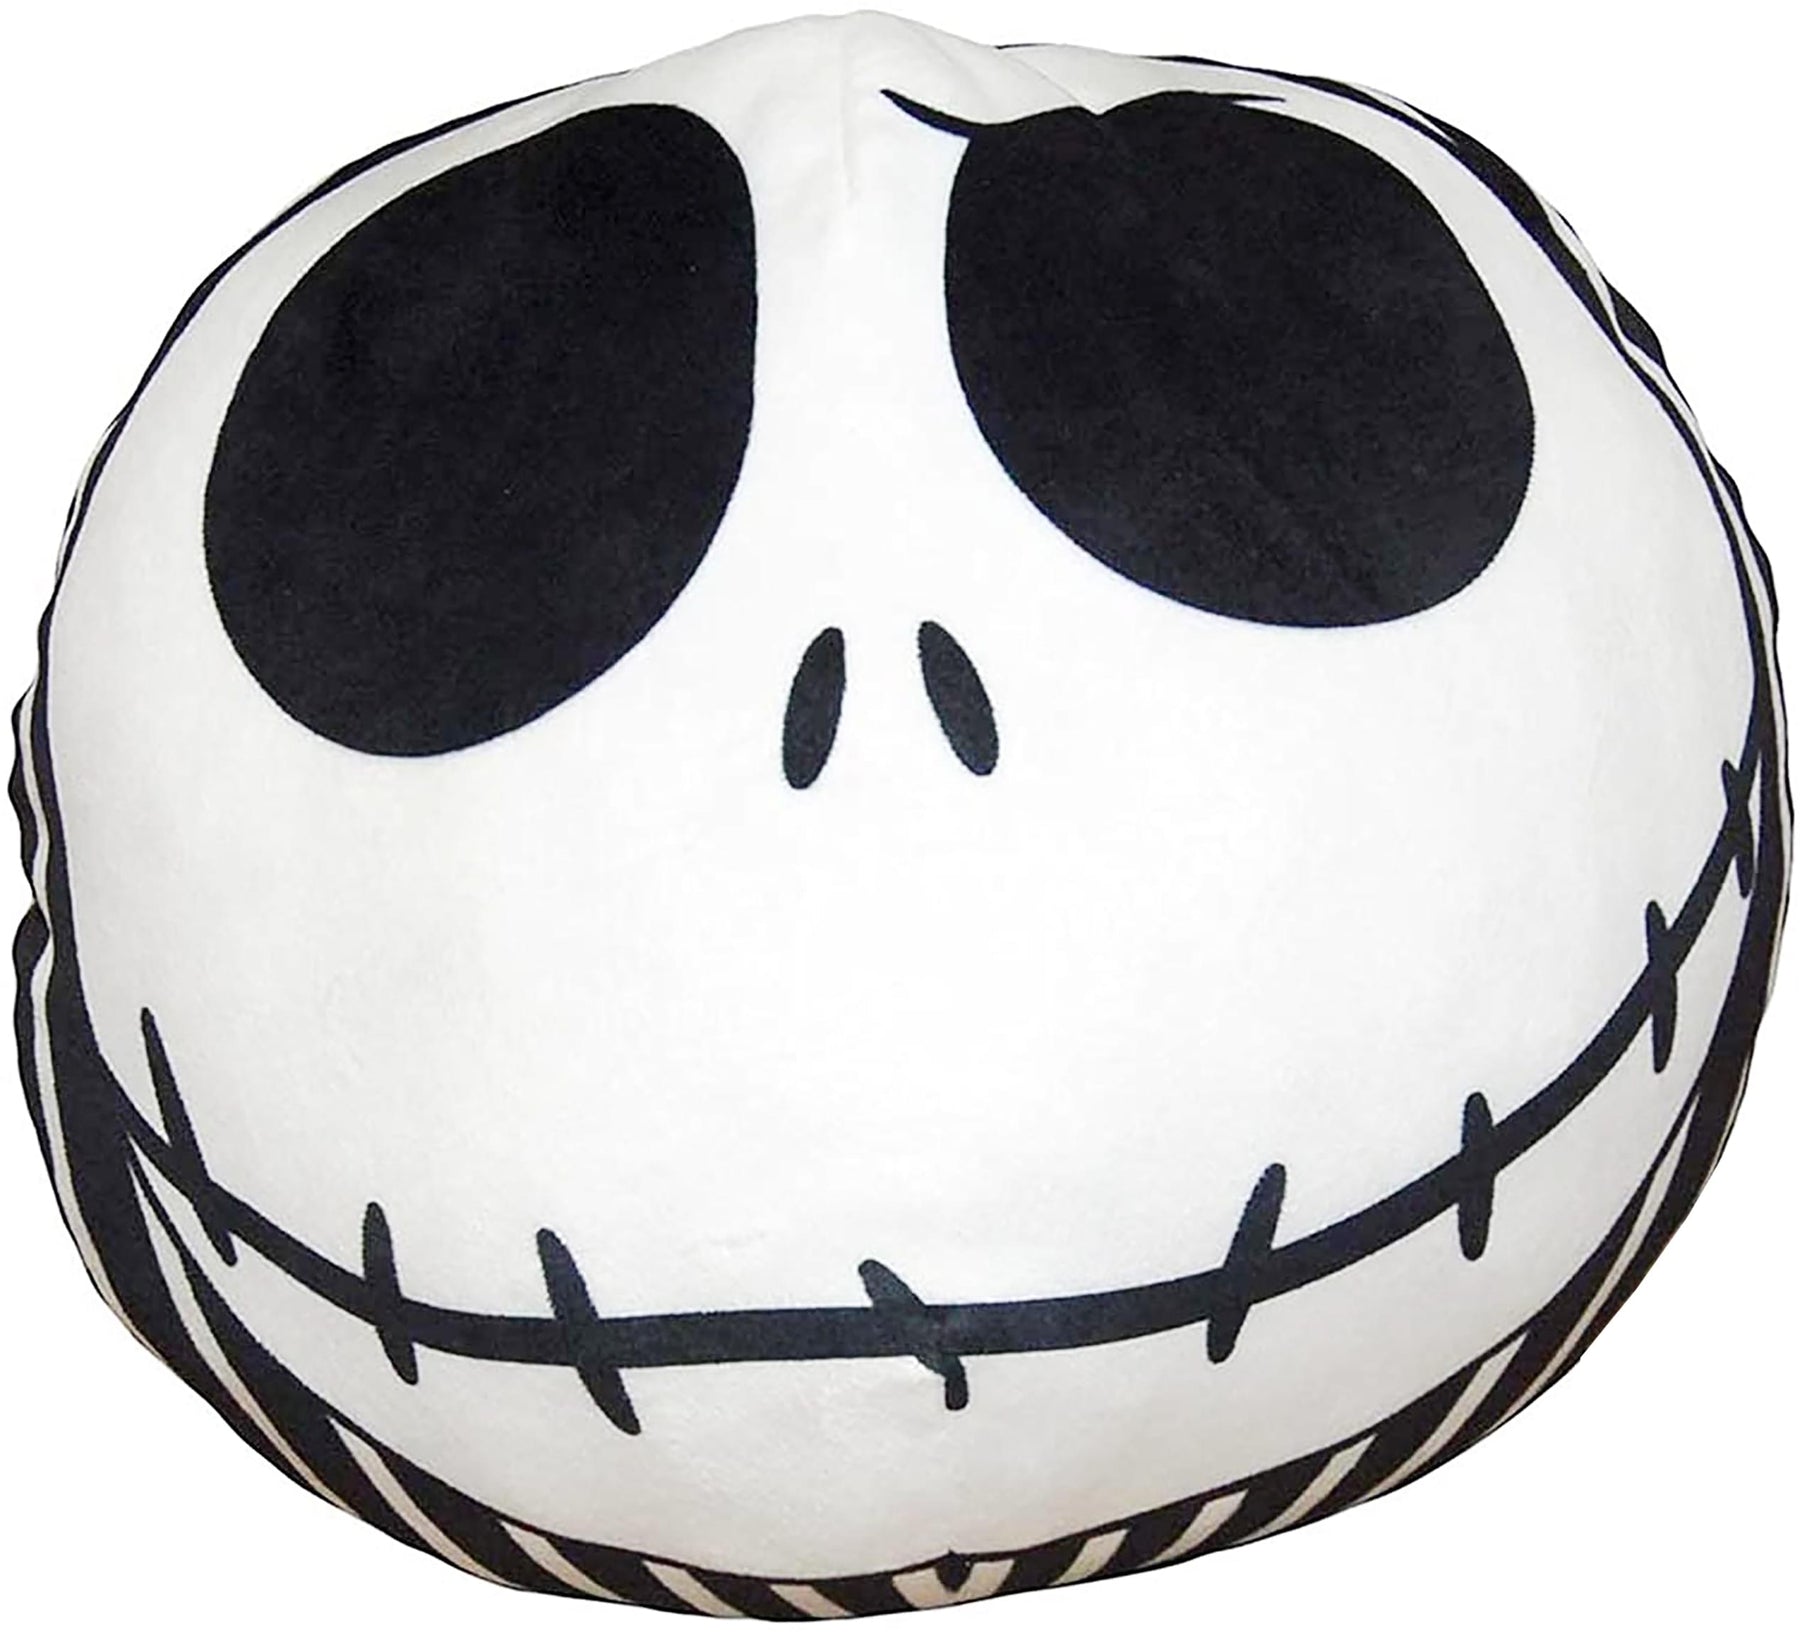 Nightmare Before Christmas Jack Grinning 11 Inch Plush Cloud Pillow